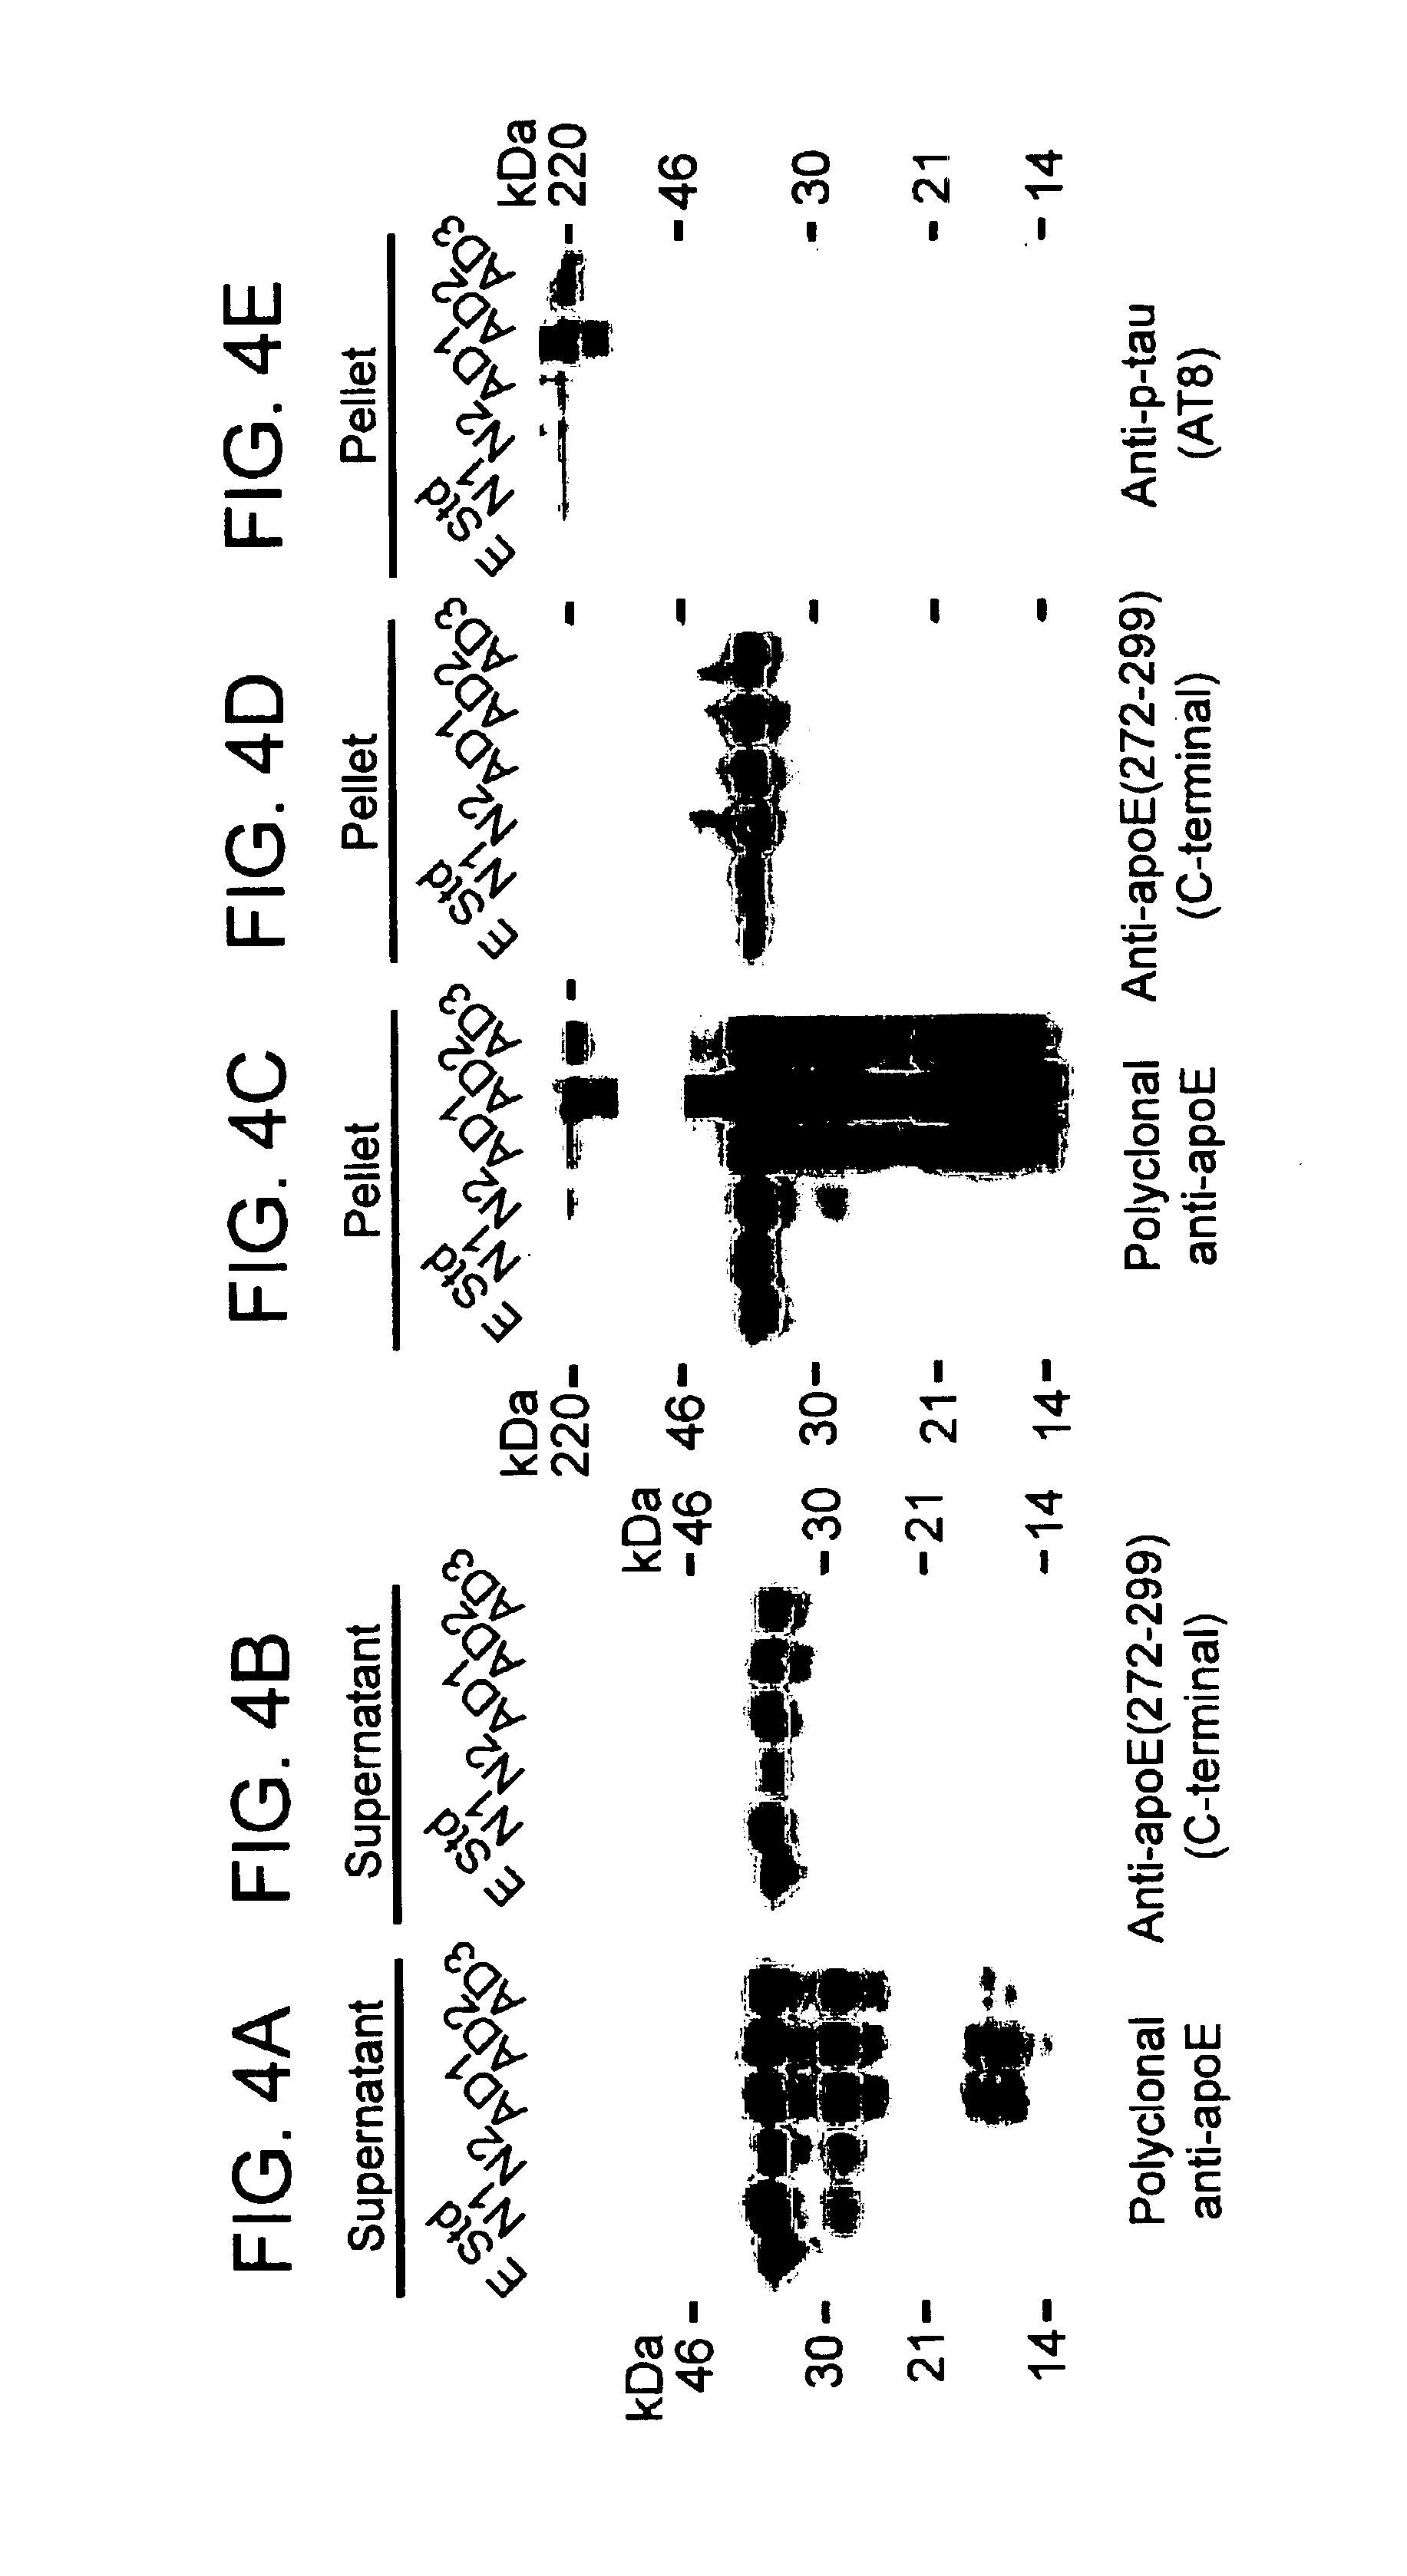 Methods of treating disorders related to apoE